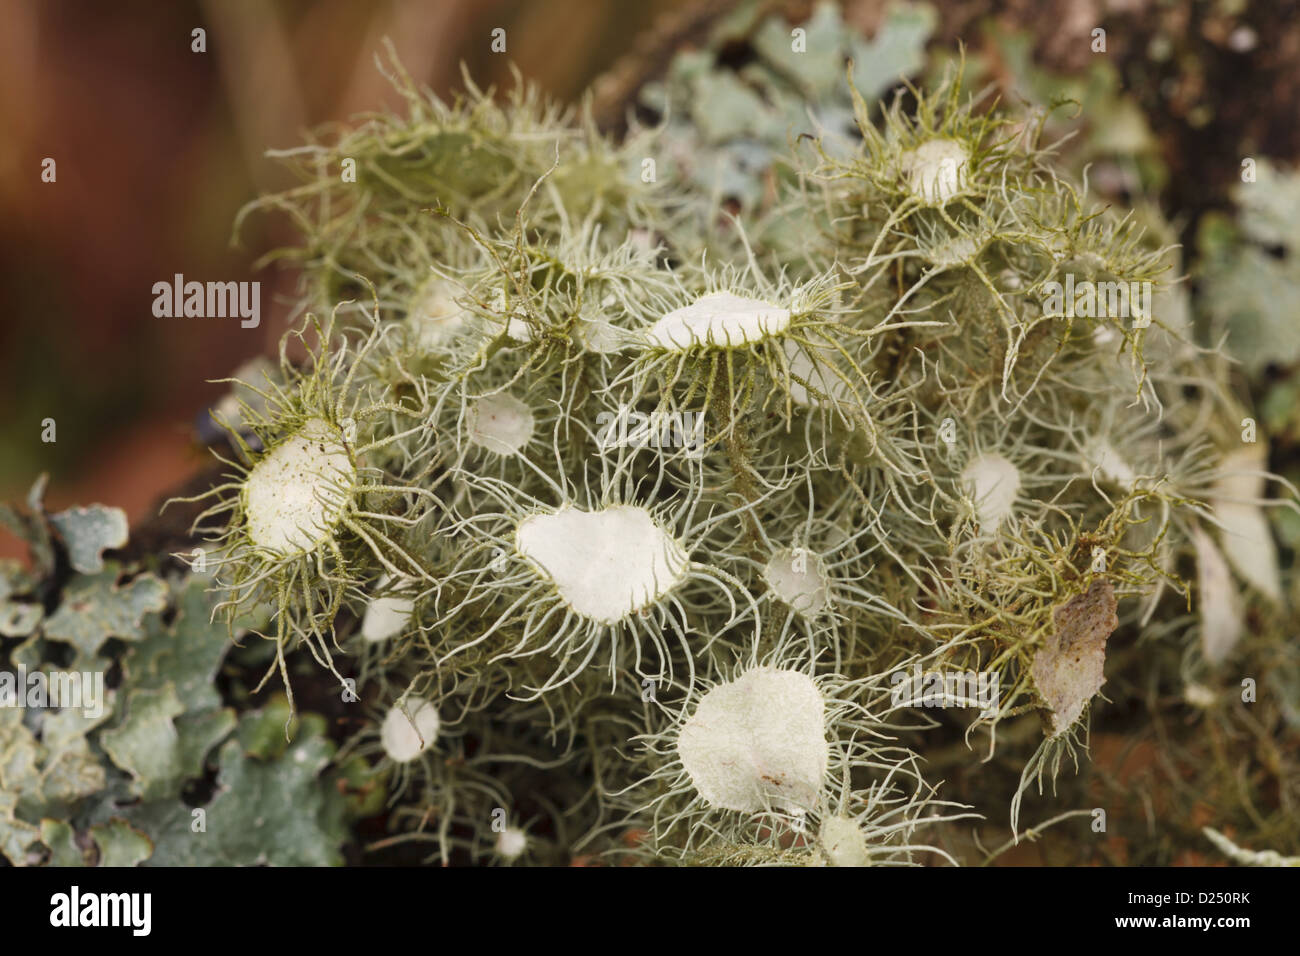 Witches' Whiskers Lichen (Usnea florida) growing on oak branch, Powys, Wales, February Stock Photo